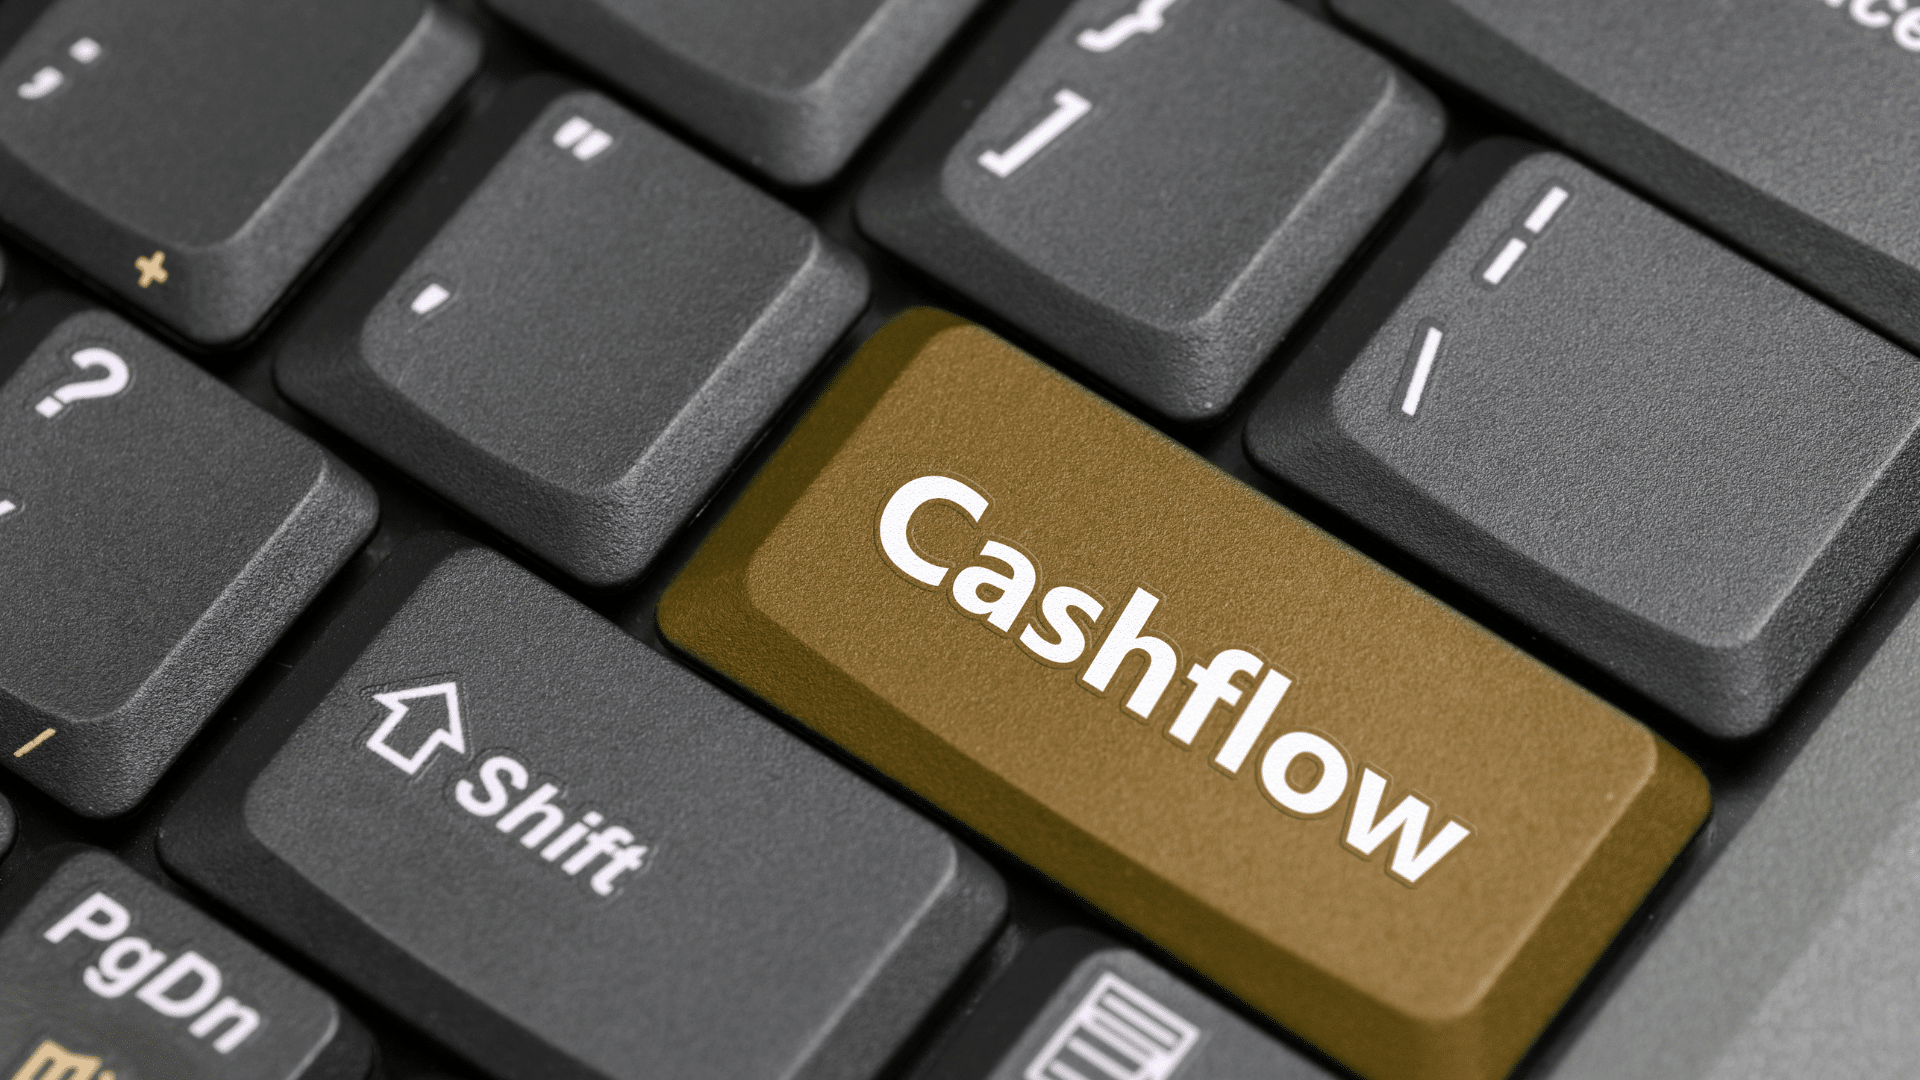 An image of a keyboard where the enter key has been replaced with a cash flow key.